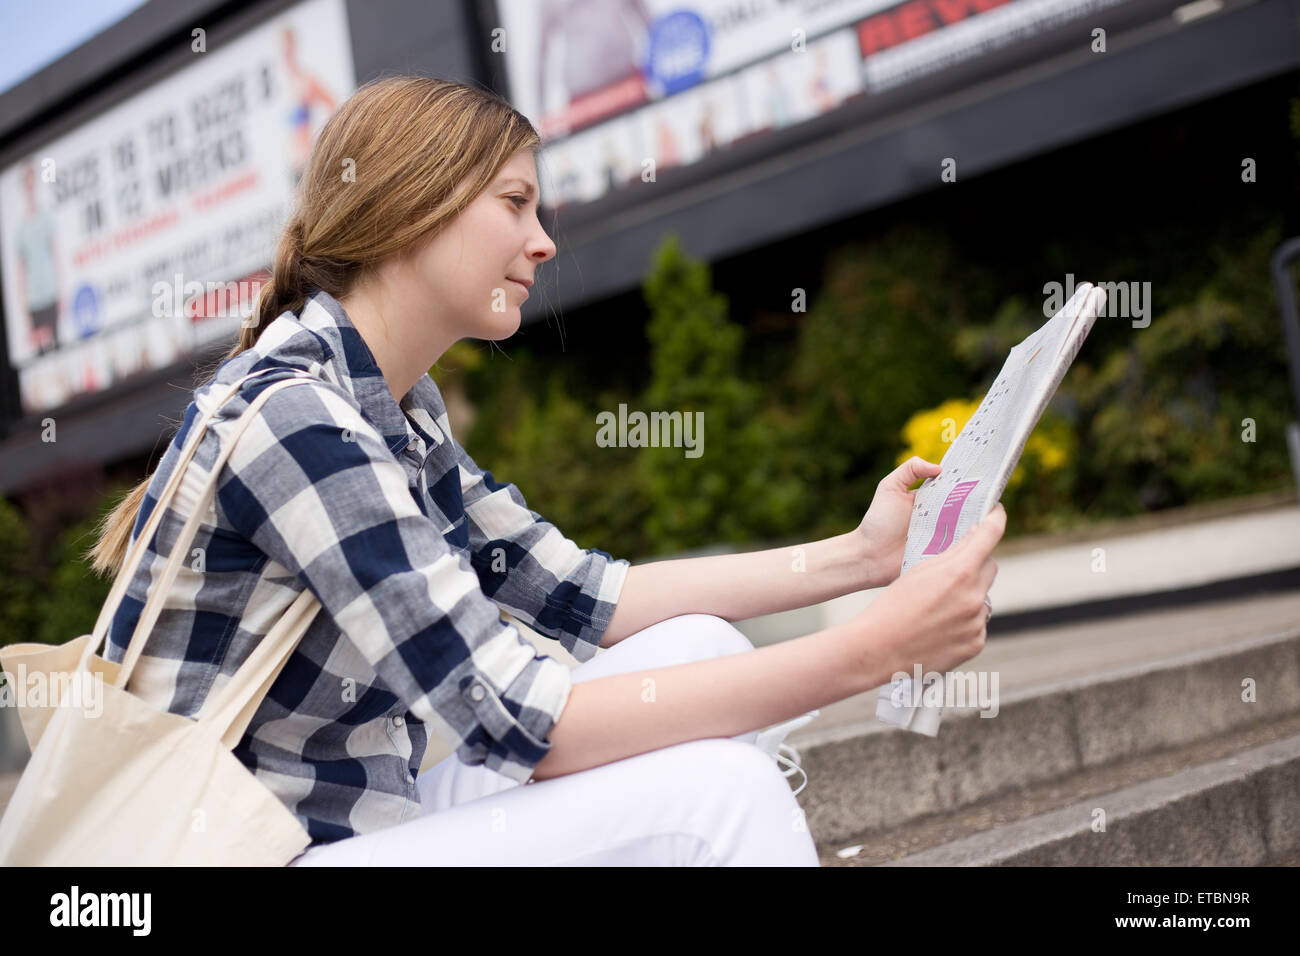 Young woman reading newspaper Banque D'Images